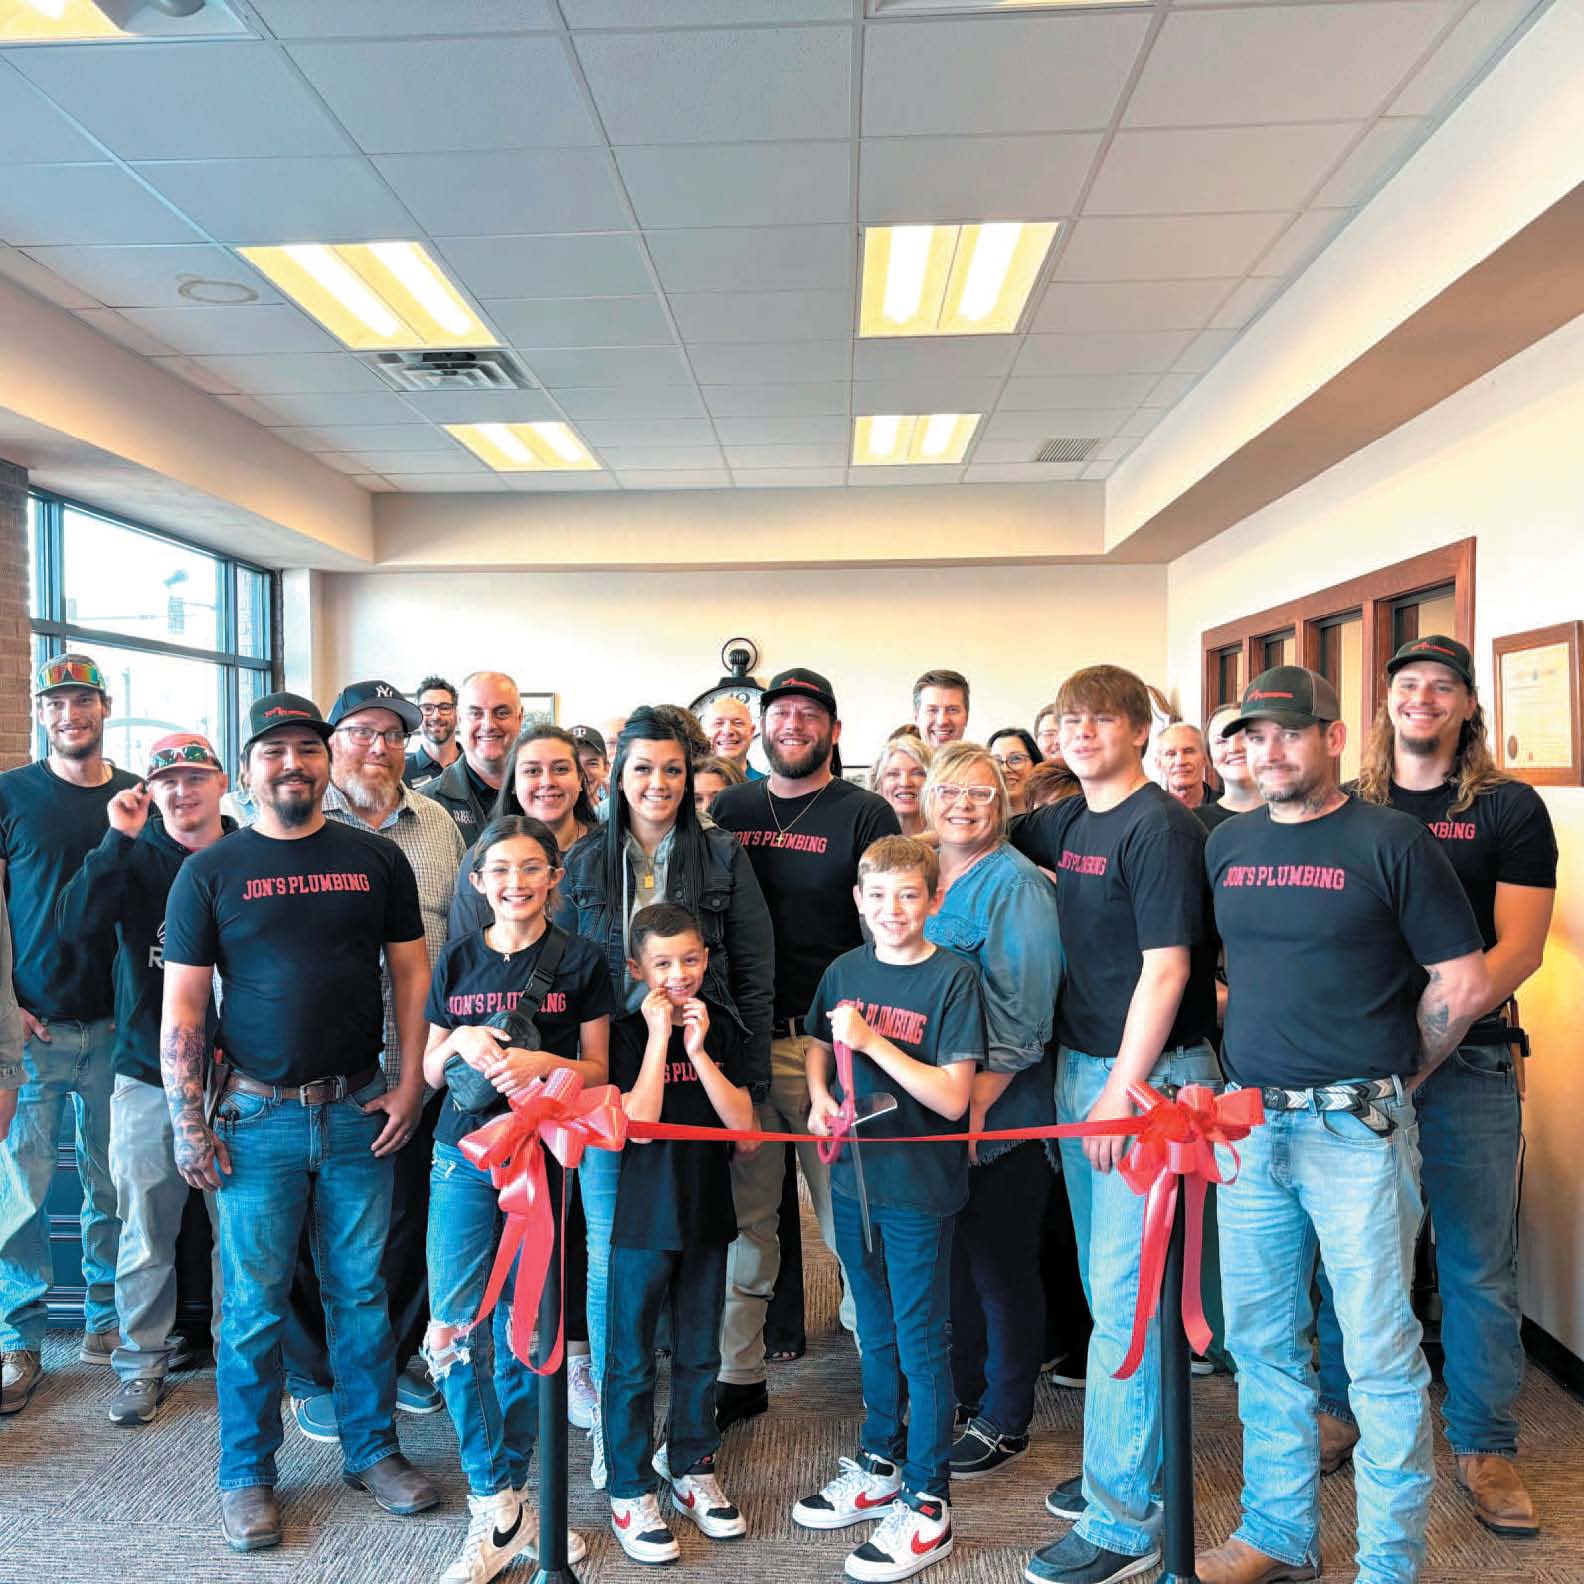 Jon’s Plumbing celebrates a ribbon cutting with the Weatherford Chamber of Commerce.